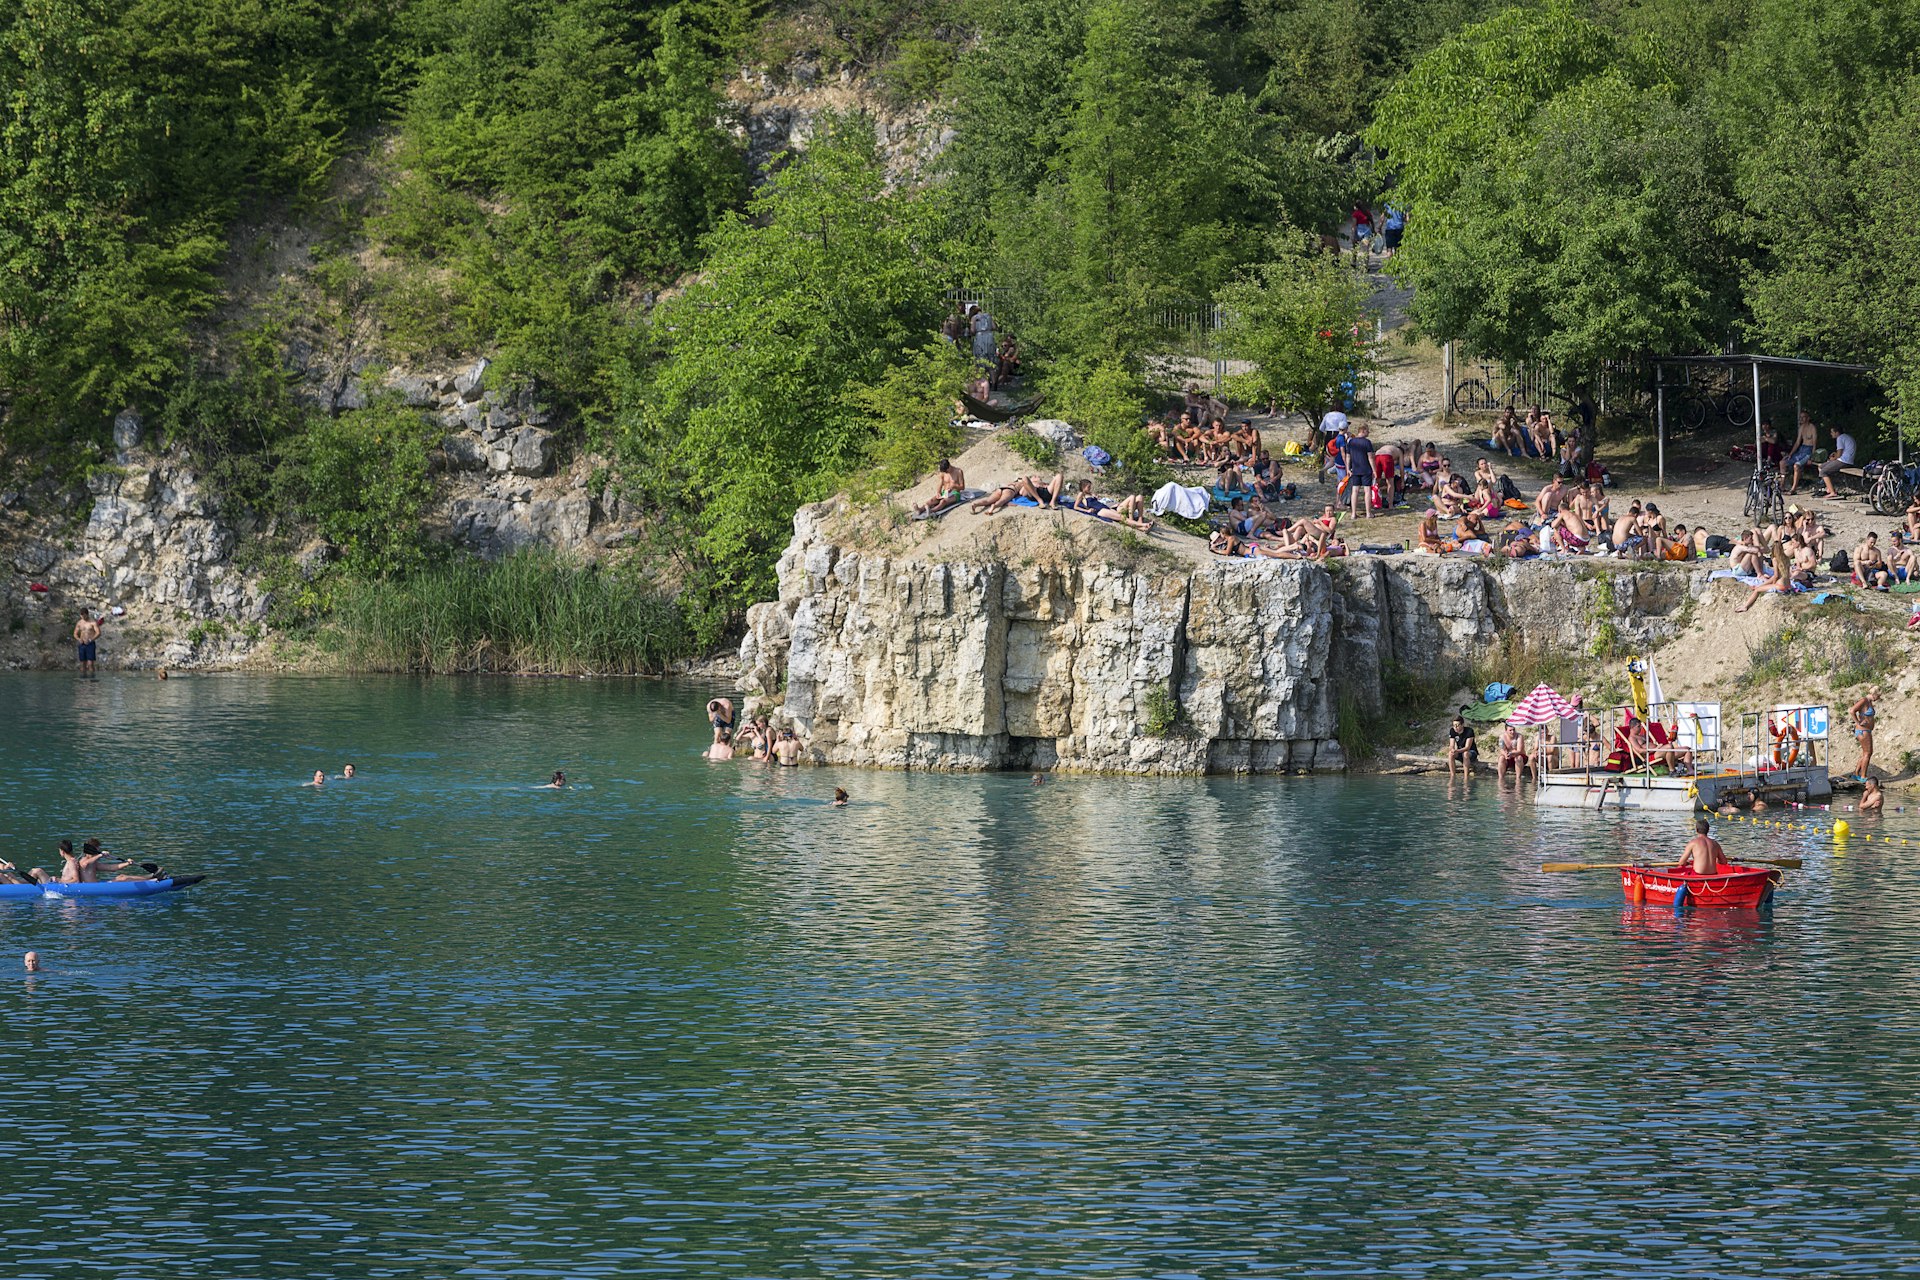 People relax around the edges of a lagoon with some swimmers in it